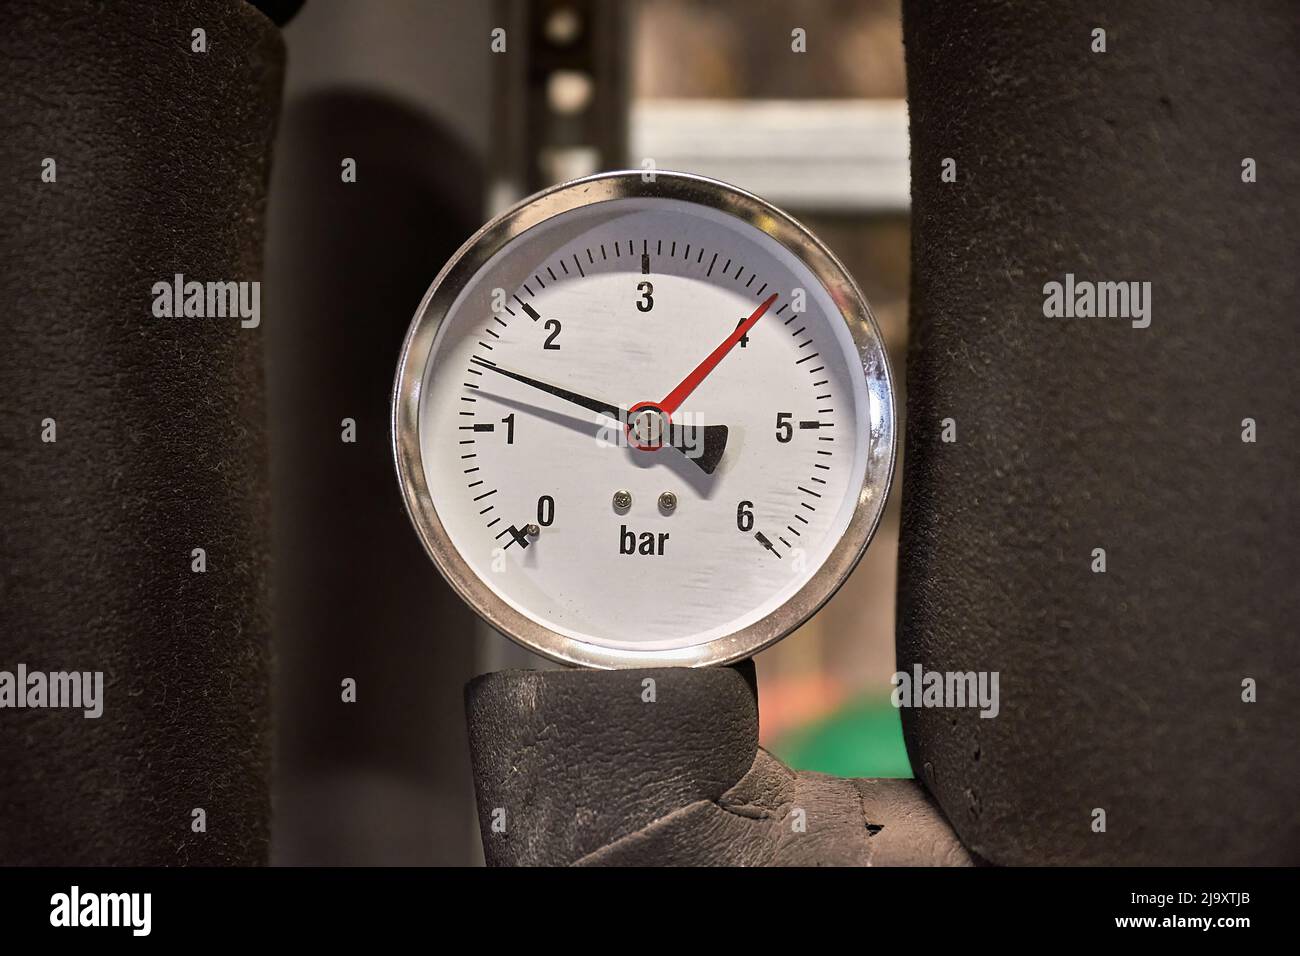 Manometer in industrial setting Stock Photo